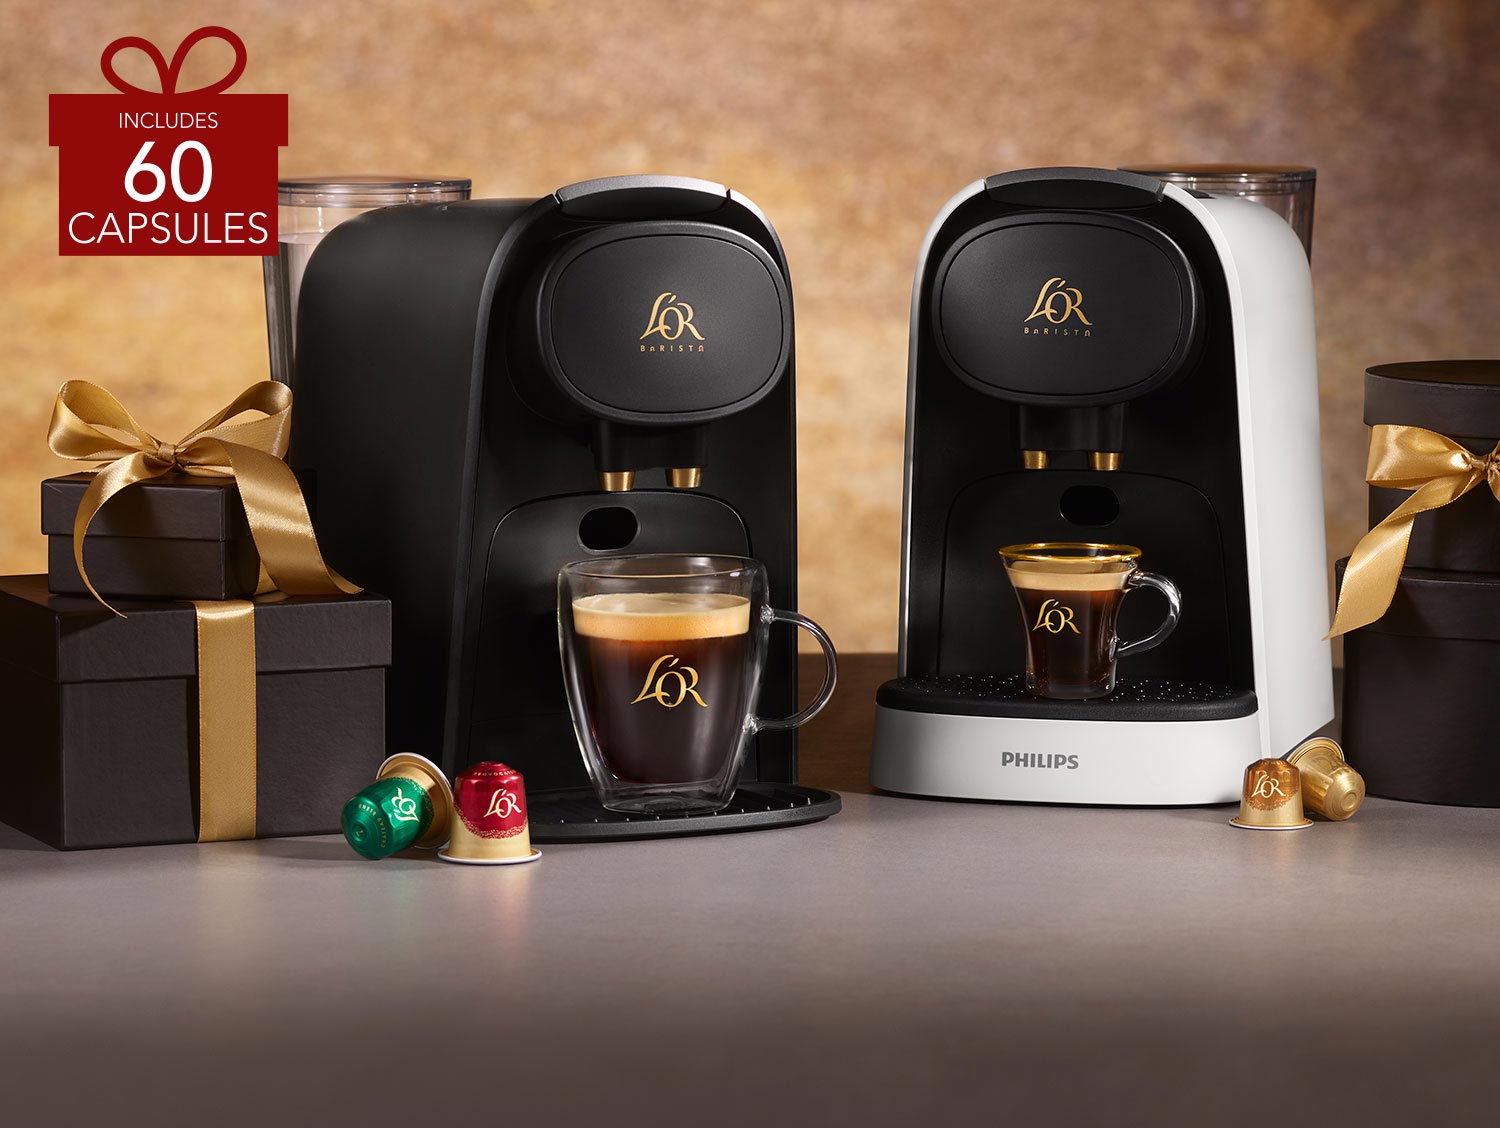 Unwrap a Coffee Experience Like No Other Enjoy the gift of high-pressure brewed coffee.  Shop early and get 40% off the L’OR BARISTA System with a 60 Capsule Holiday Assortment.